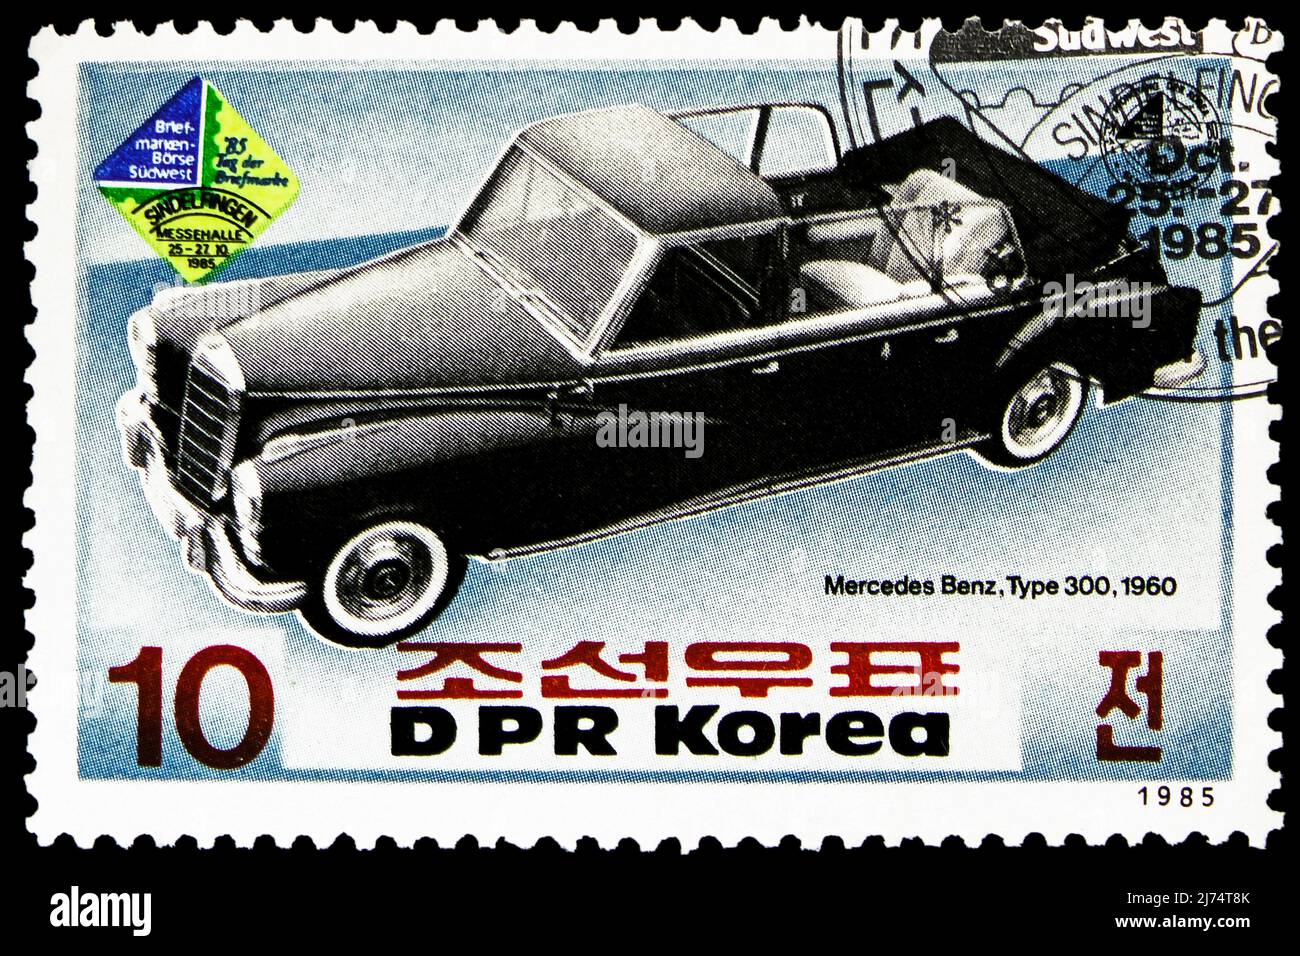 MOSCOW, RUSSIA - MARCH 27, 2022: Postage stamp printed in Korea shows Mercedes Benz 300, Stamp Fair - Southwest -85 - Sindelfingen, Germany serie, cir Stock Photo